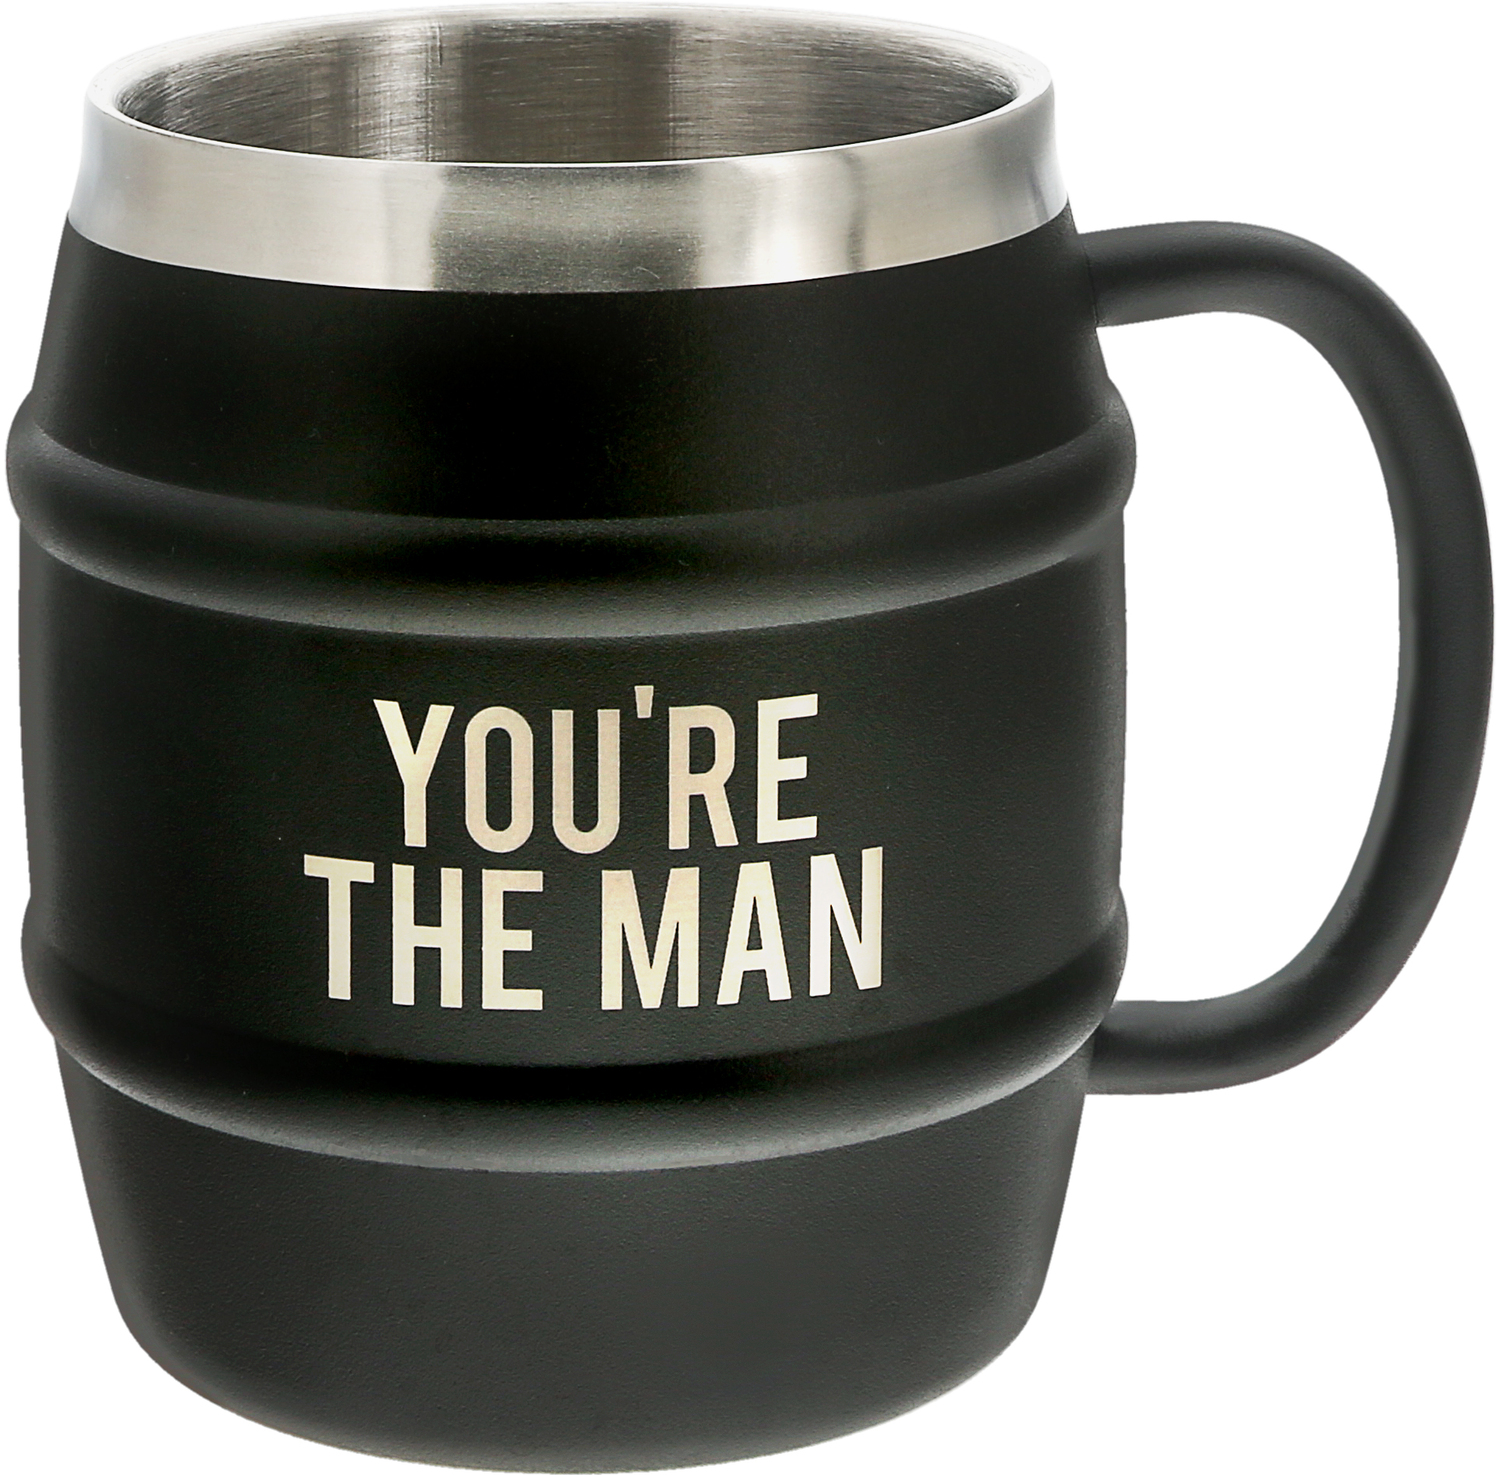 The Man by Man Made - The Man - 15 oz. Stainless Steel Double Wall Stein